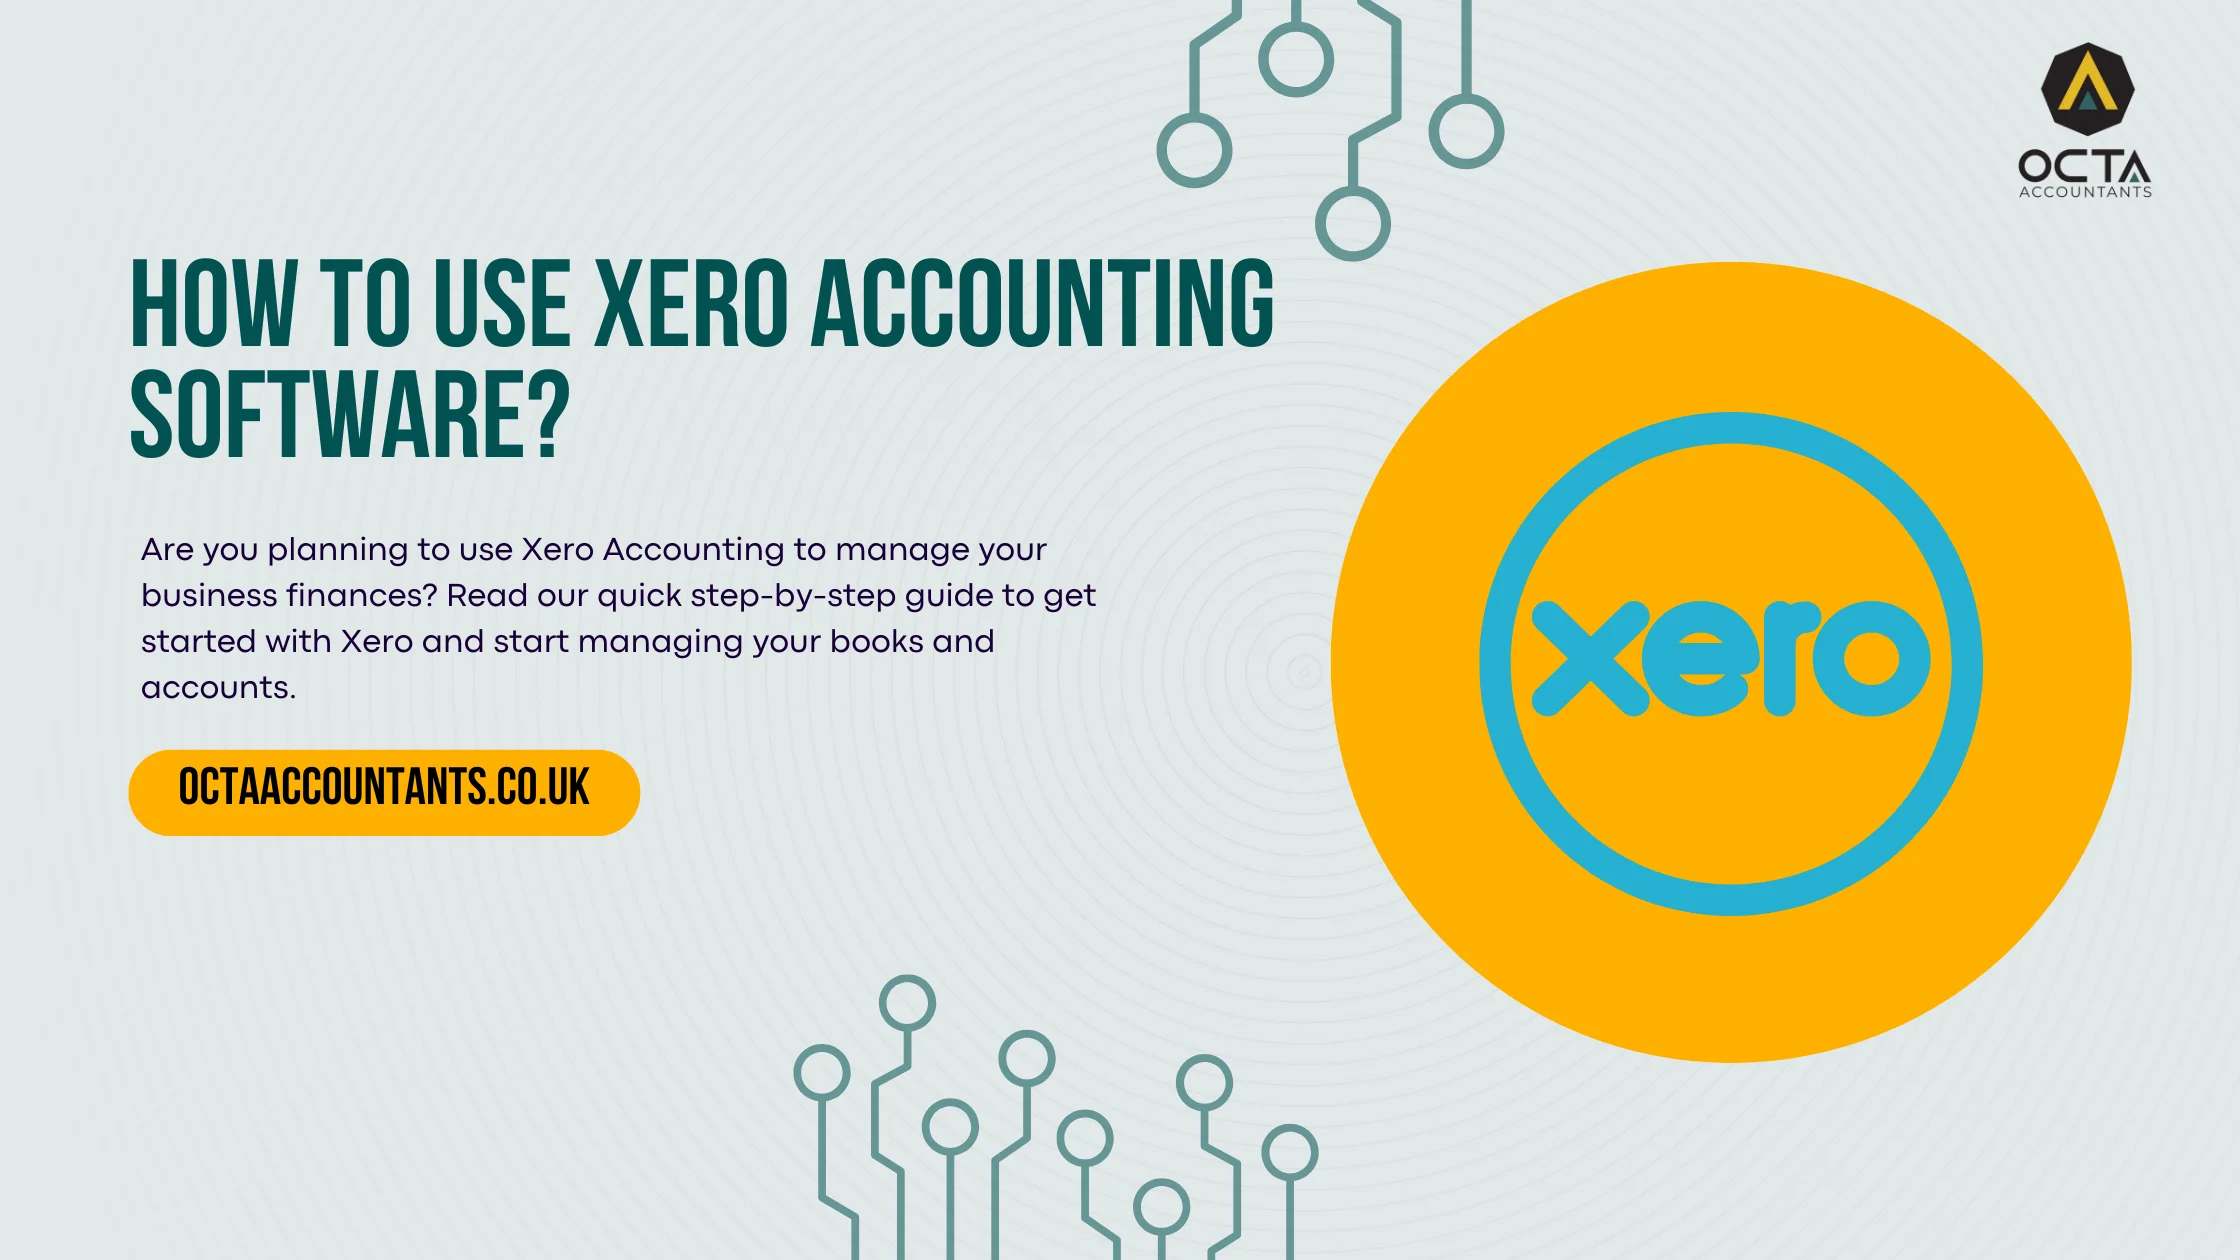 How to use xero accounting software?